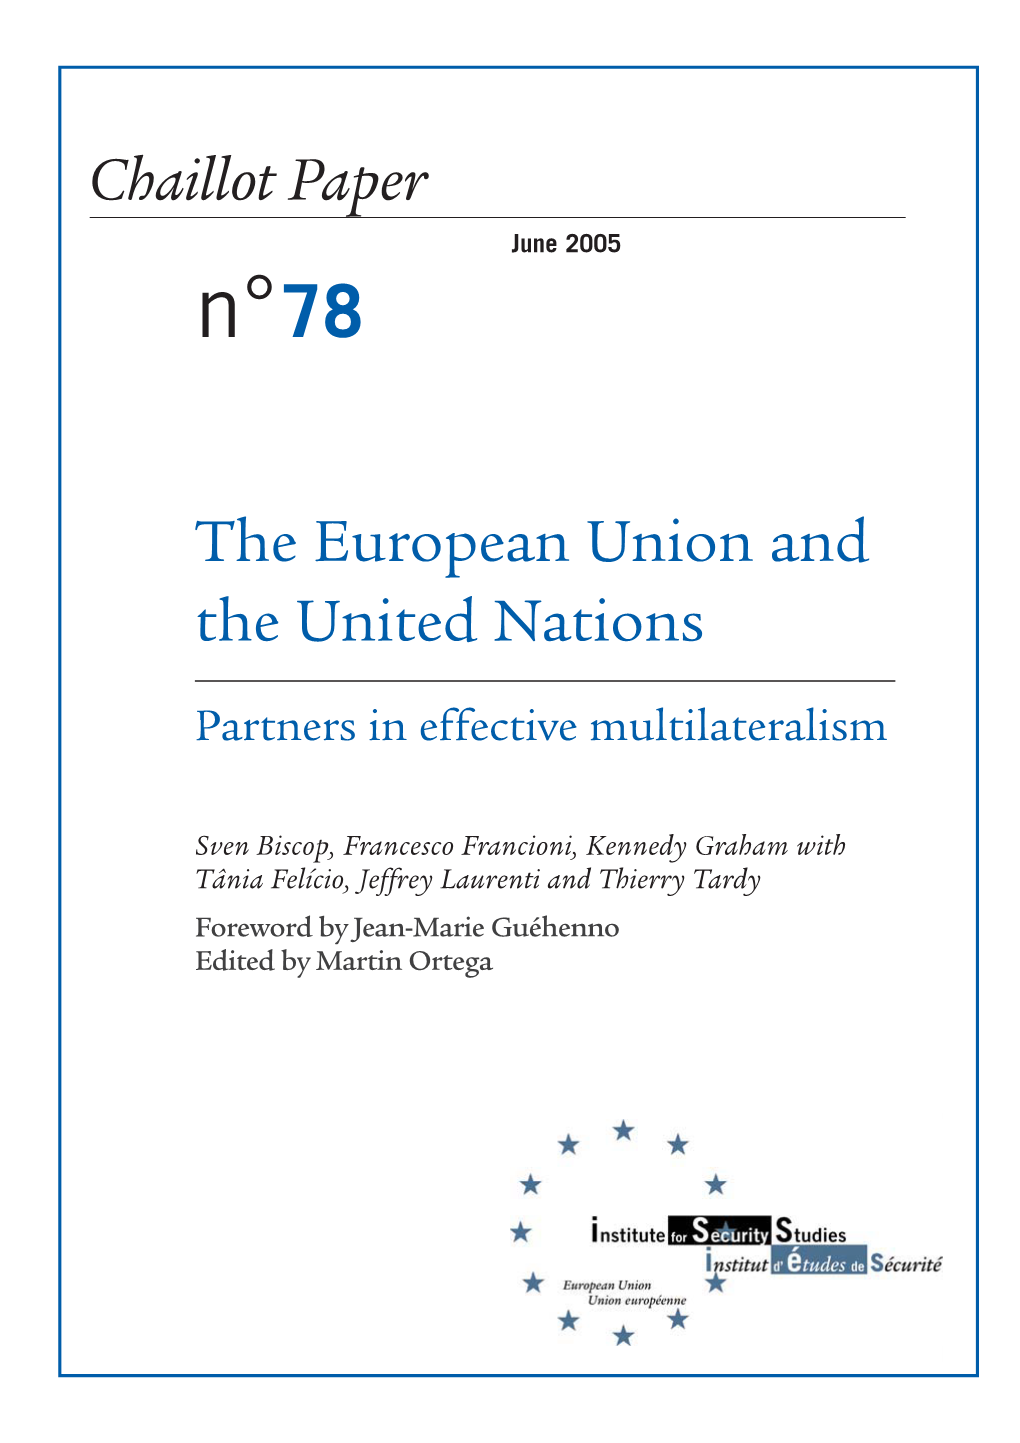 The European Union and the United Nations. Partners in Effective